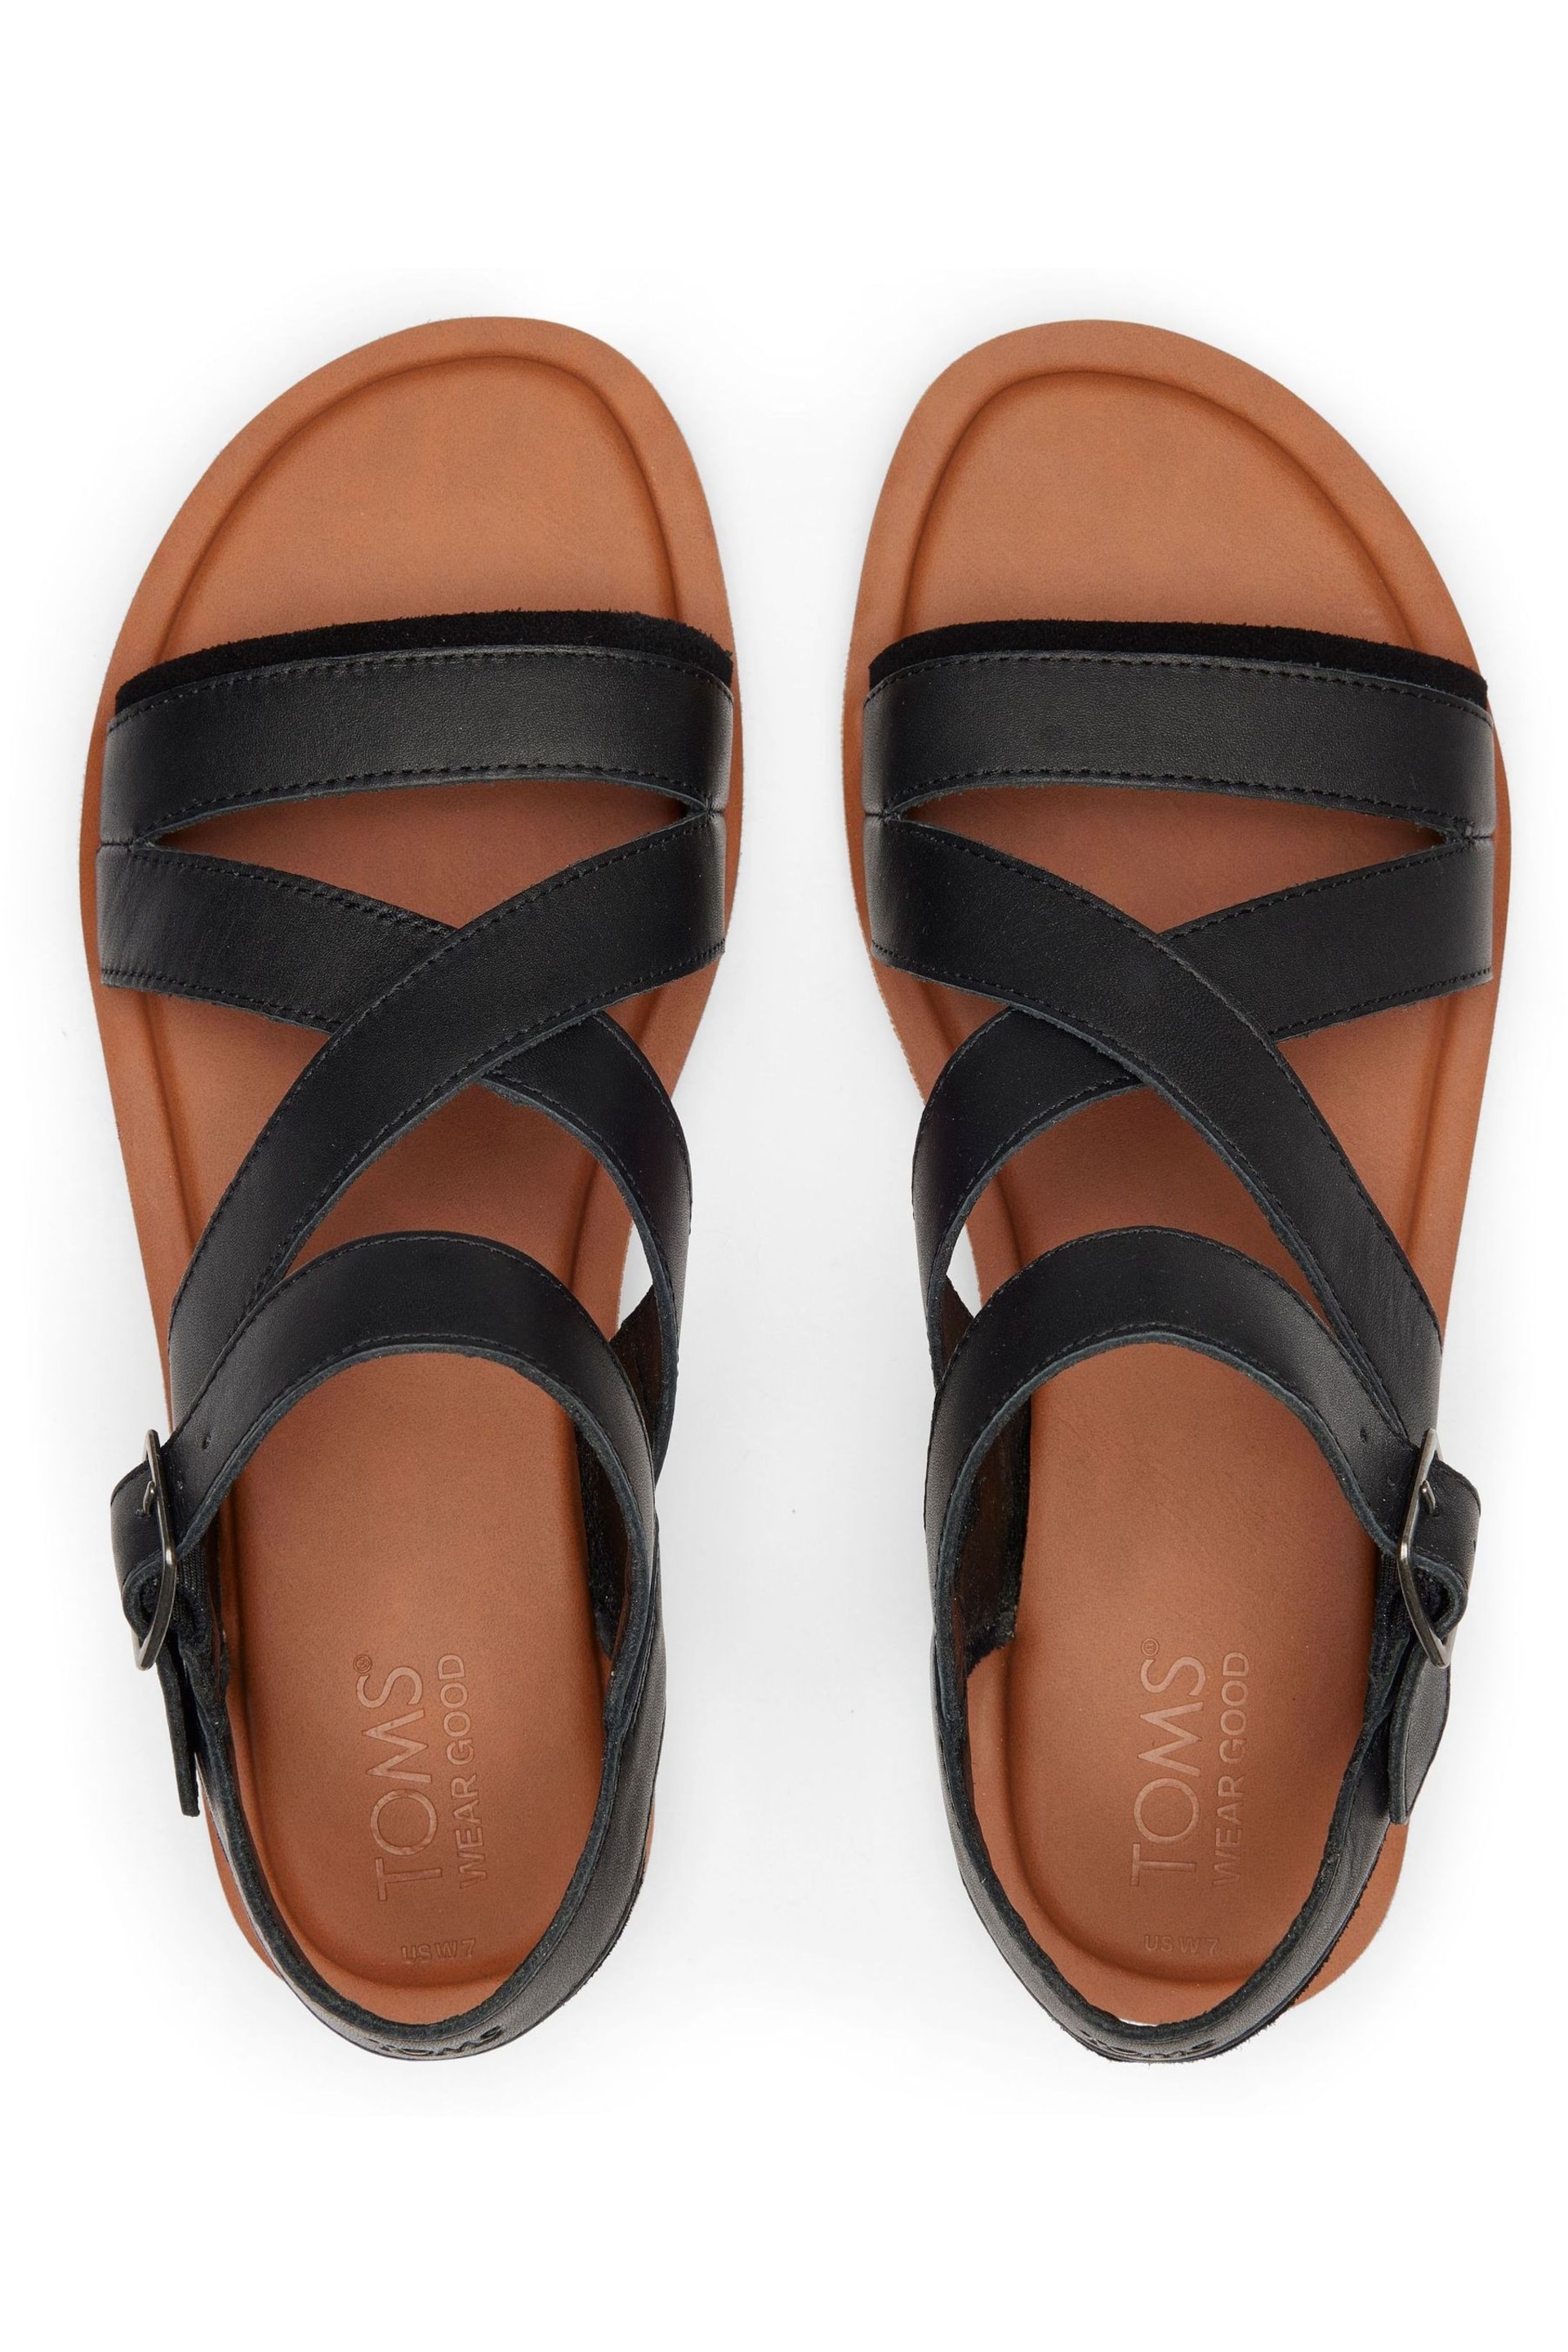 TOMS Sloane Black Sandals In Leather - Image 5 of 6